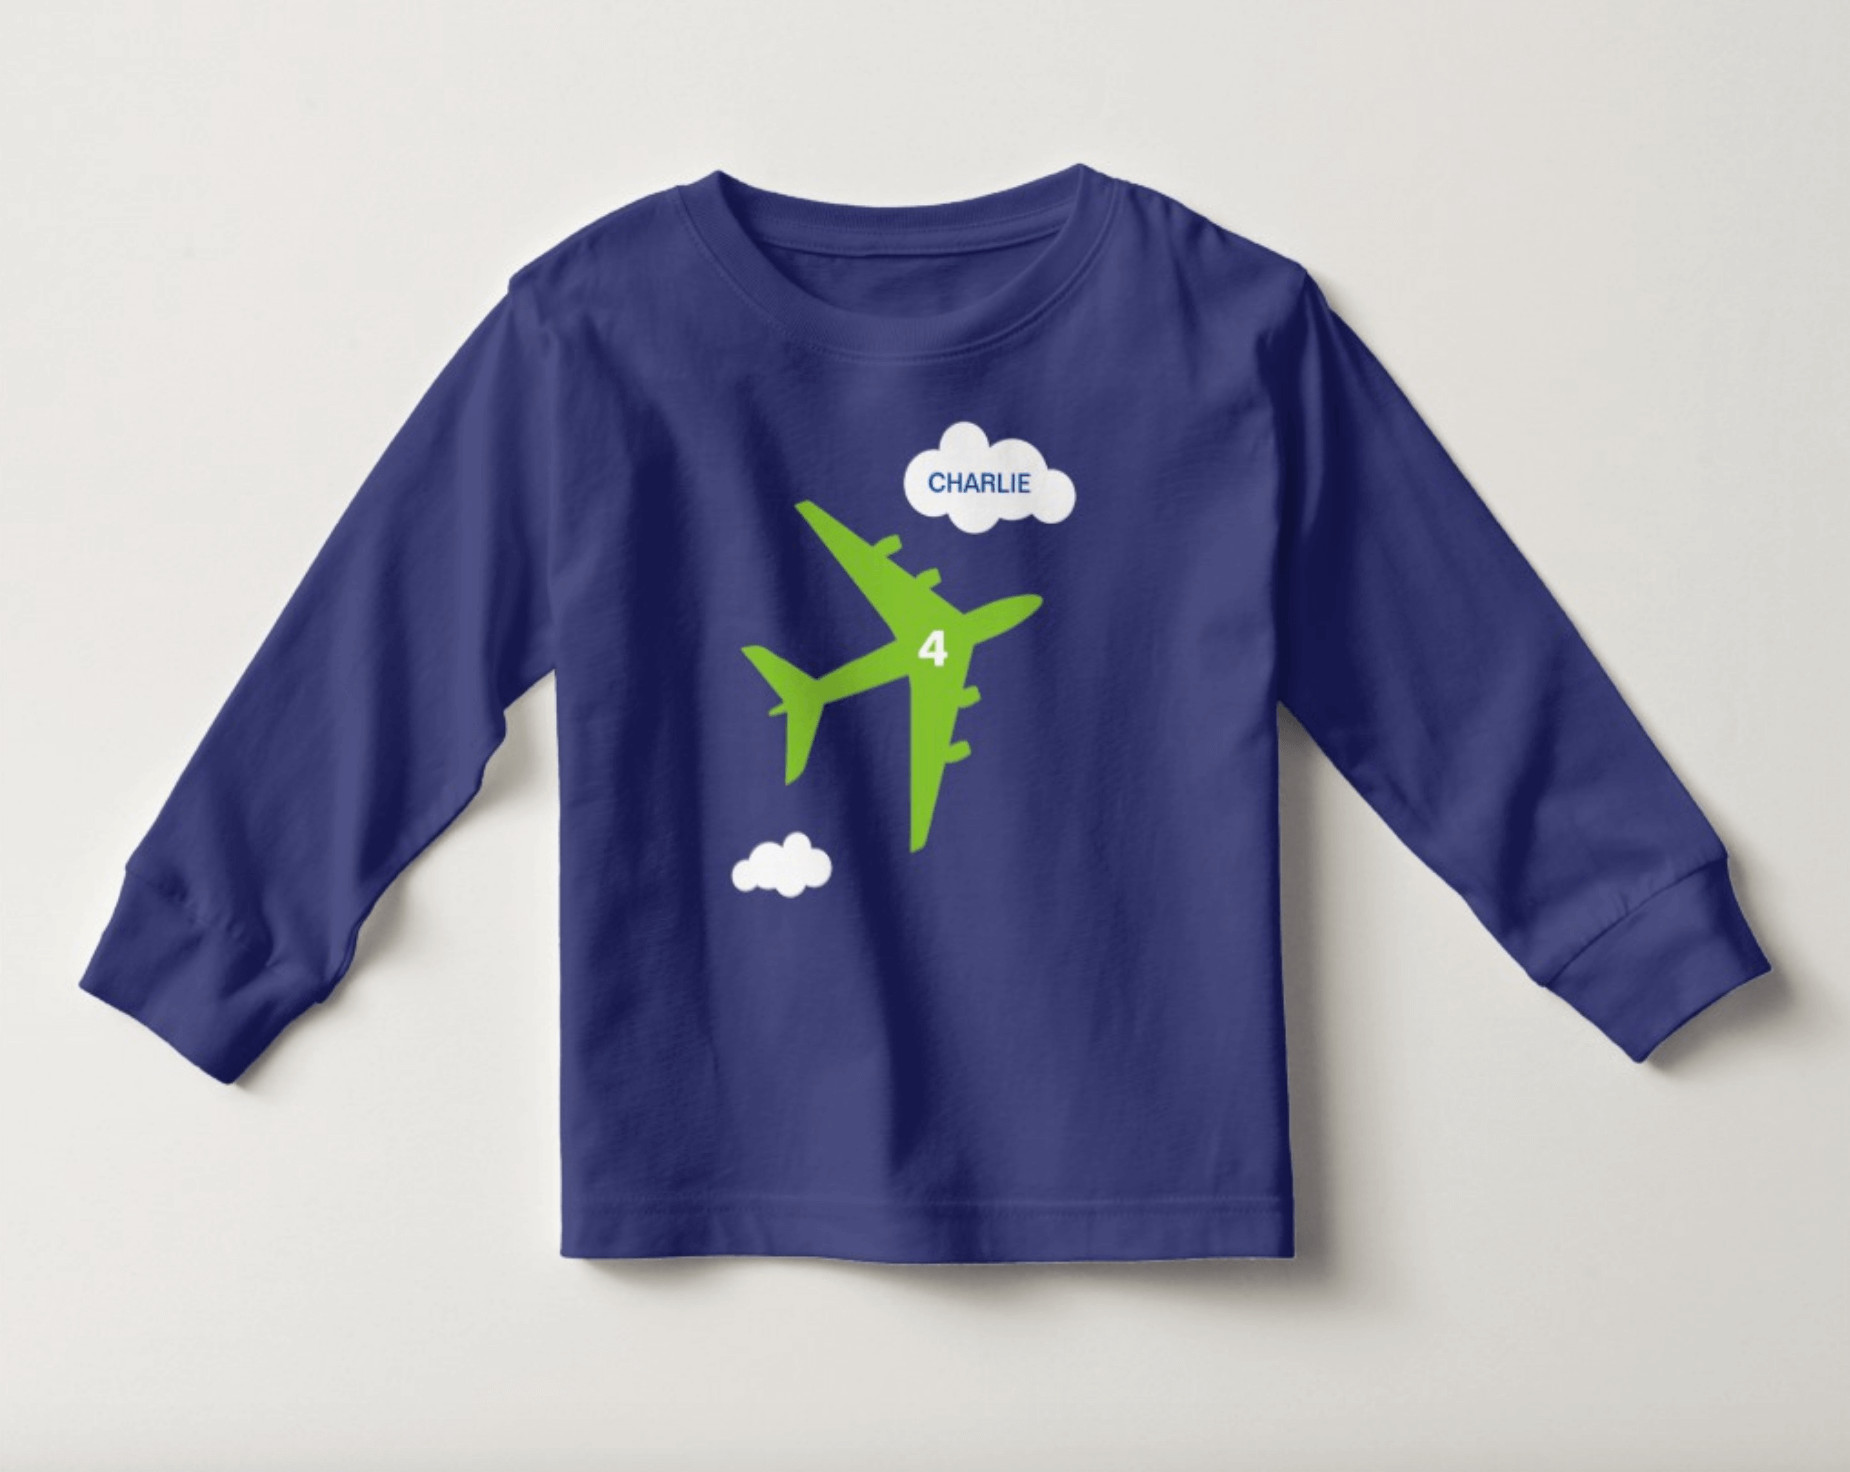 Personalized airplane birthday party t-shirt sizes 2T, 3T, 4T and 5T/6T